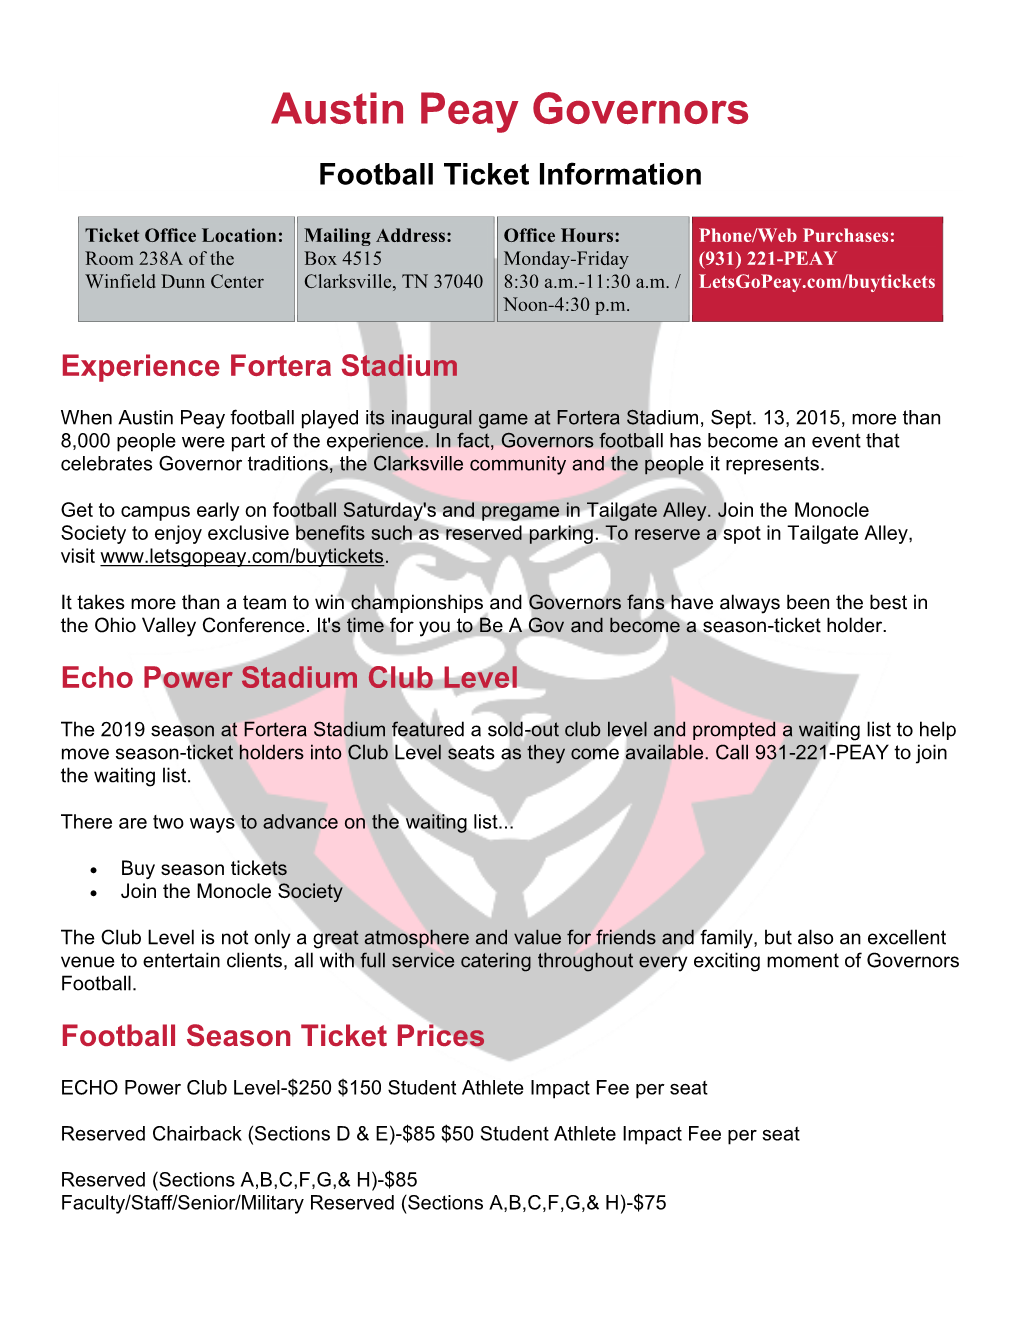 Austin Peay Governors Football Ticket Information